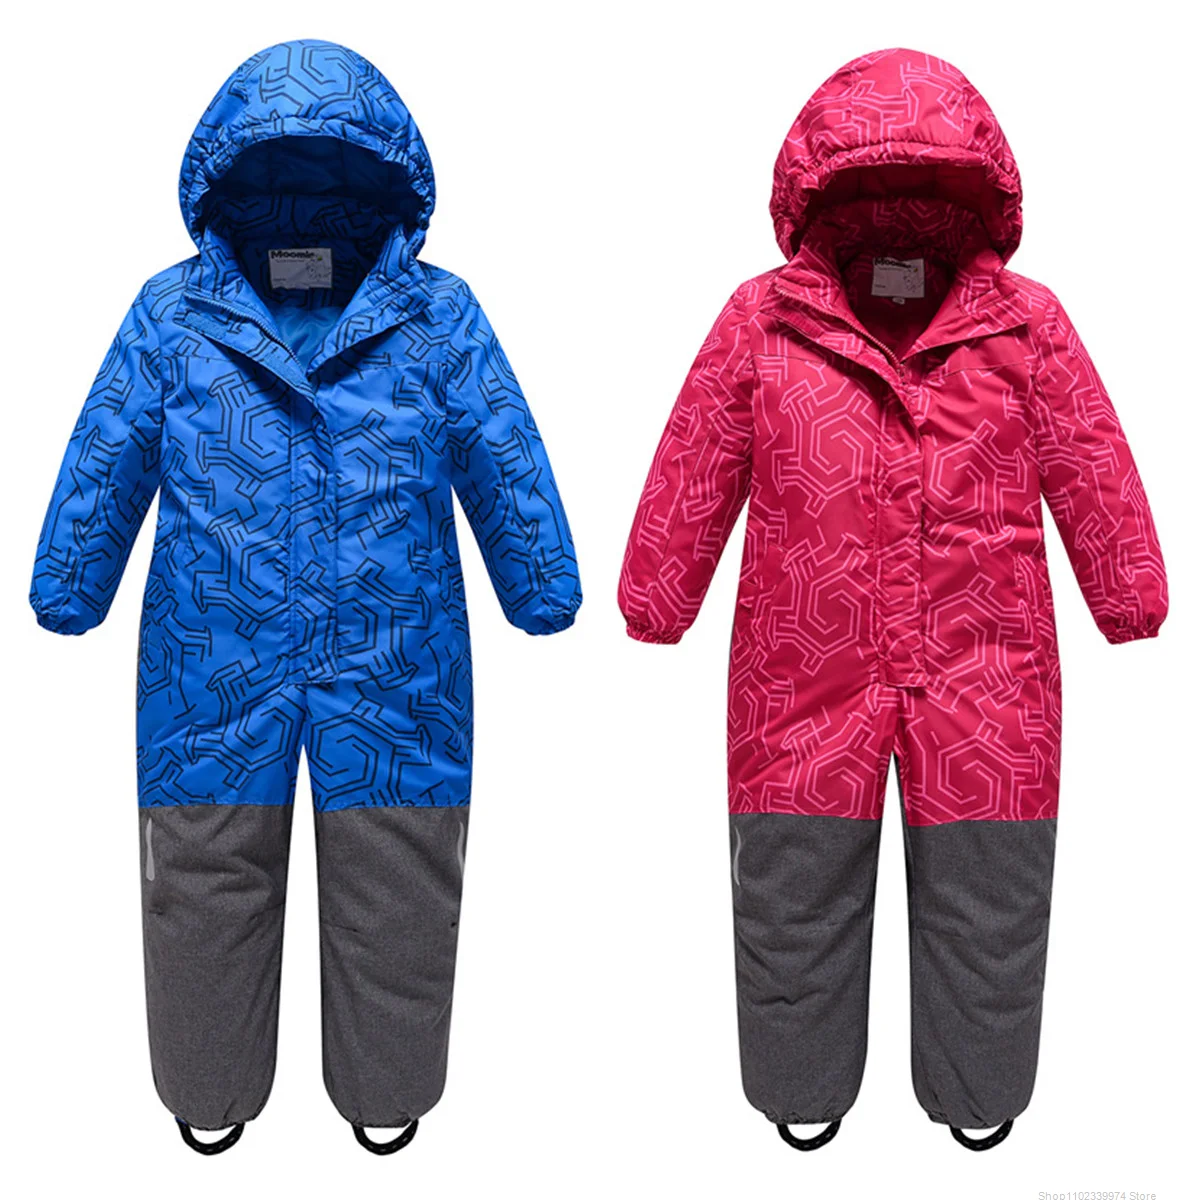 2022 Children's Ski Suit Windproof Waterproof Thick Warm Outdoor Skiing Snowboarding One-piece Snow Sports Clothing Set